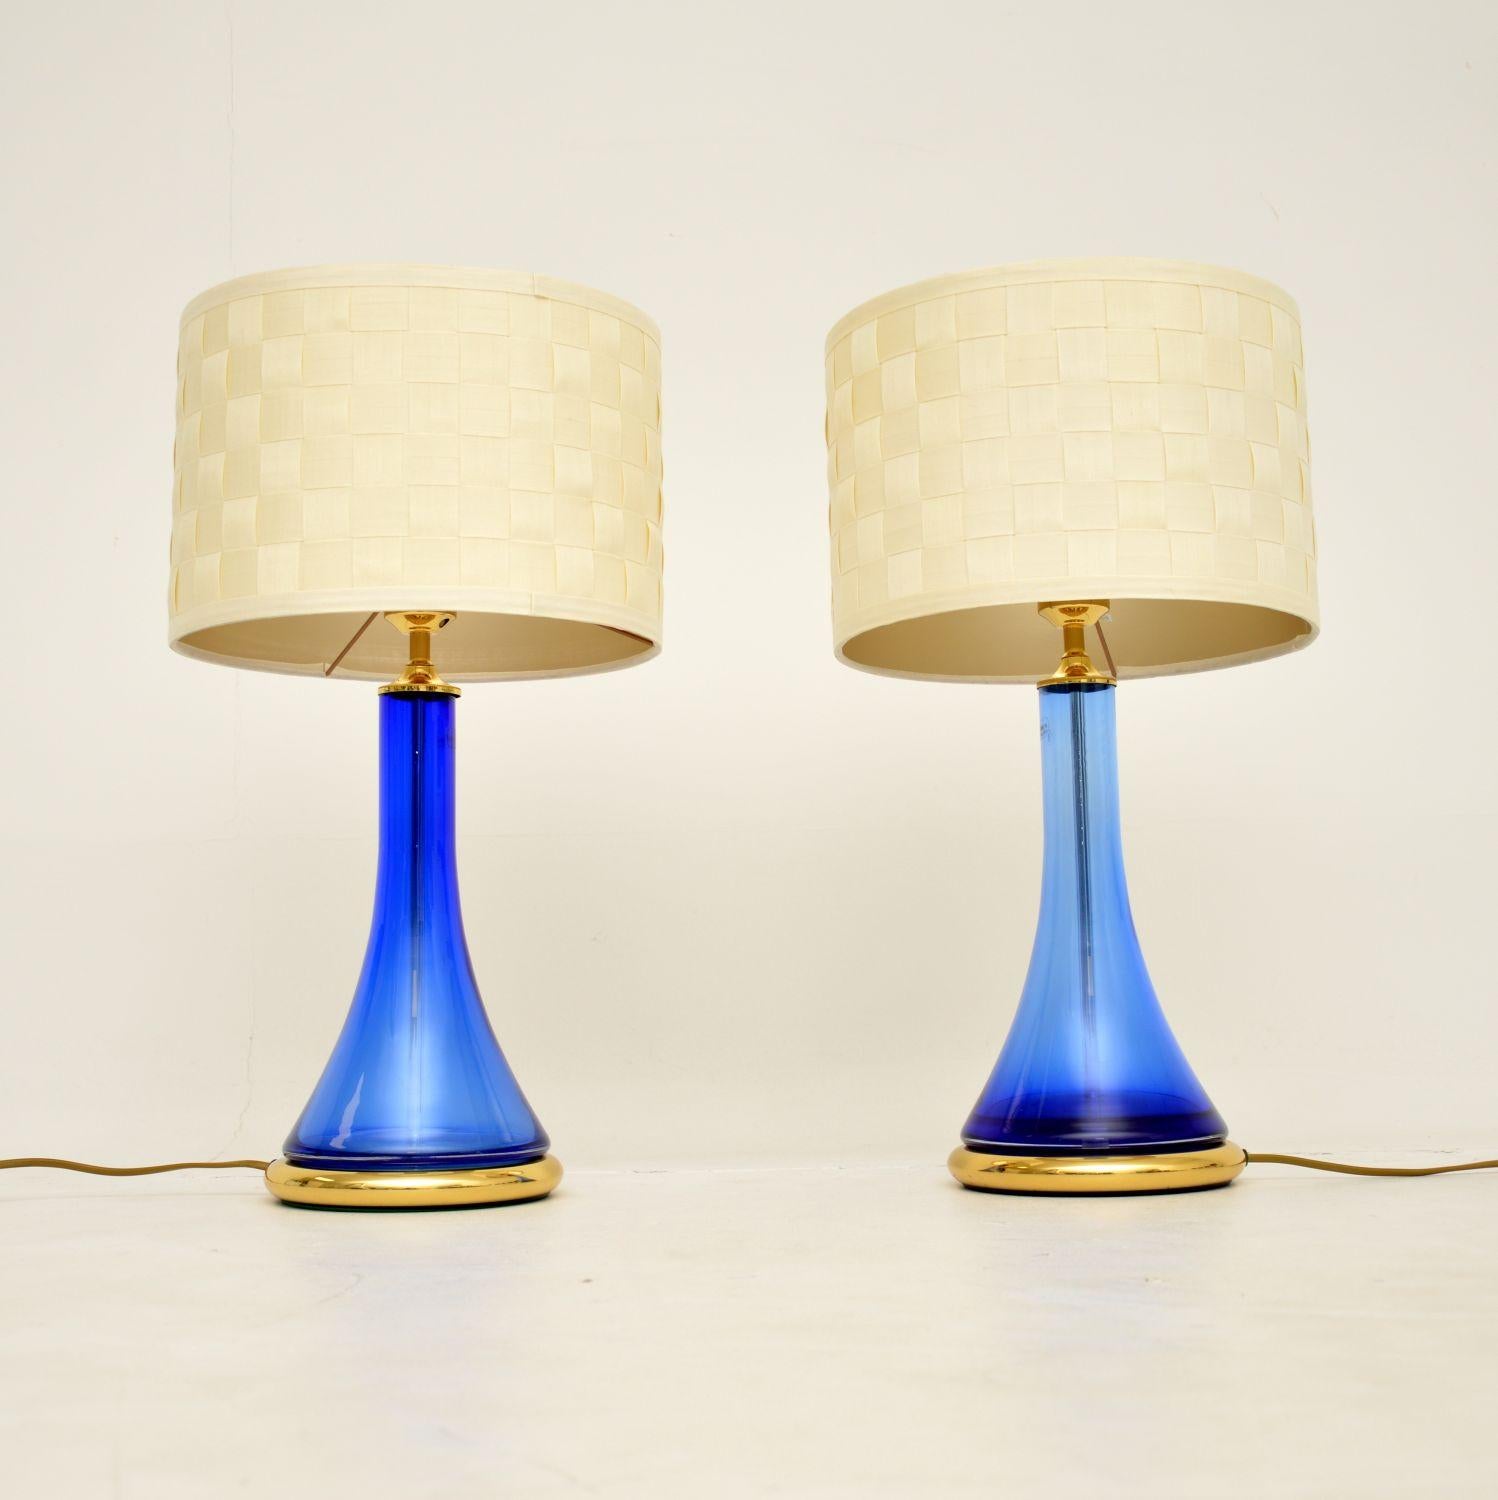 A stunning pair of vintage table lamps in blue glass and brass. These were made in Germany by Nachtmann, they date from around the 1970-1980’s.

The quality is superb, these are beautifully designed and are a great size.

The condition is